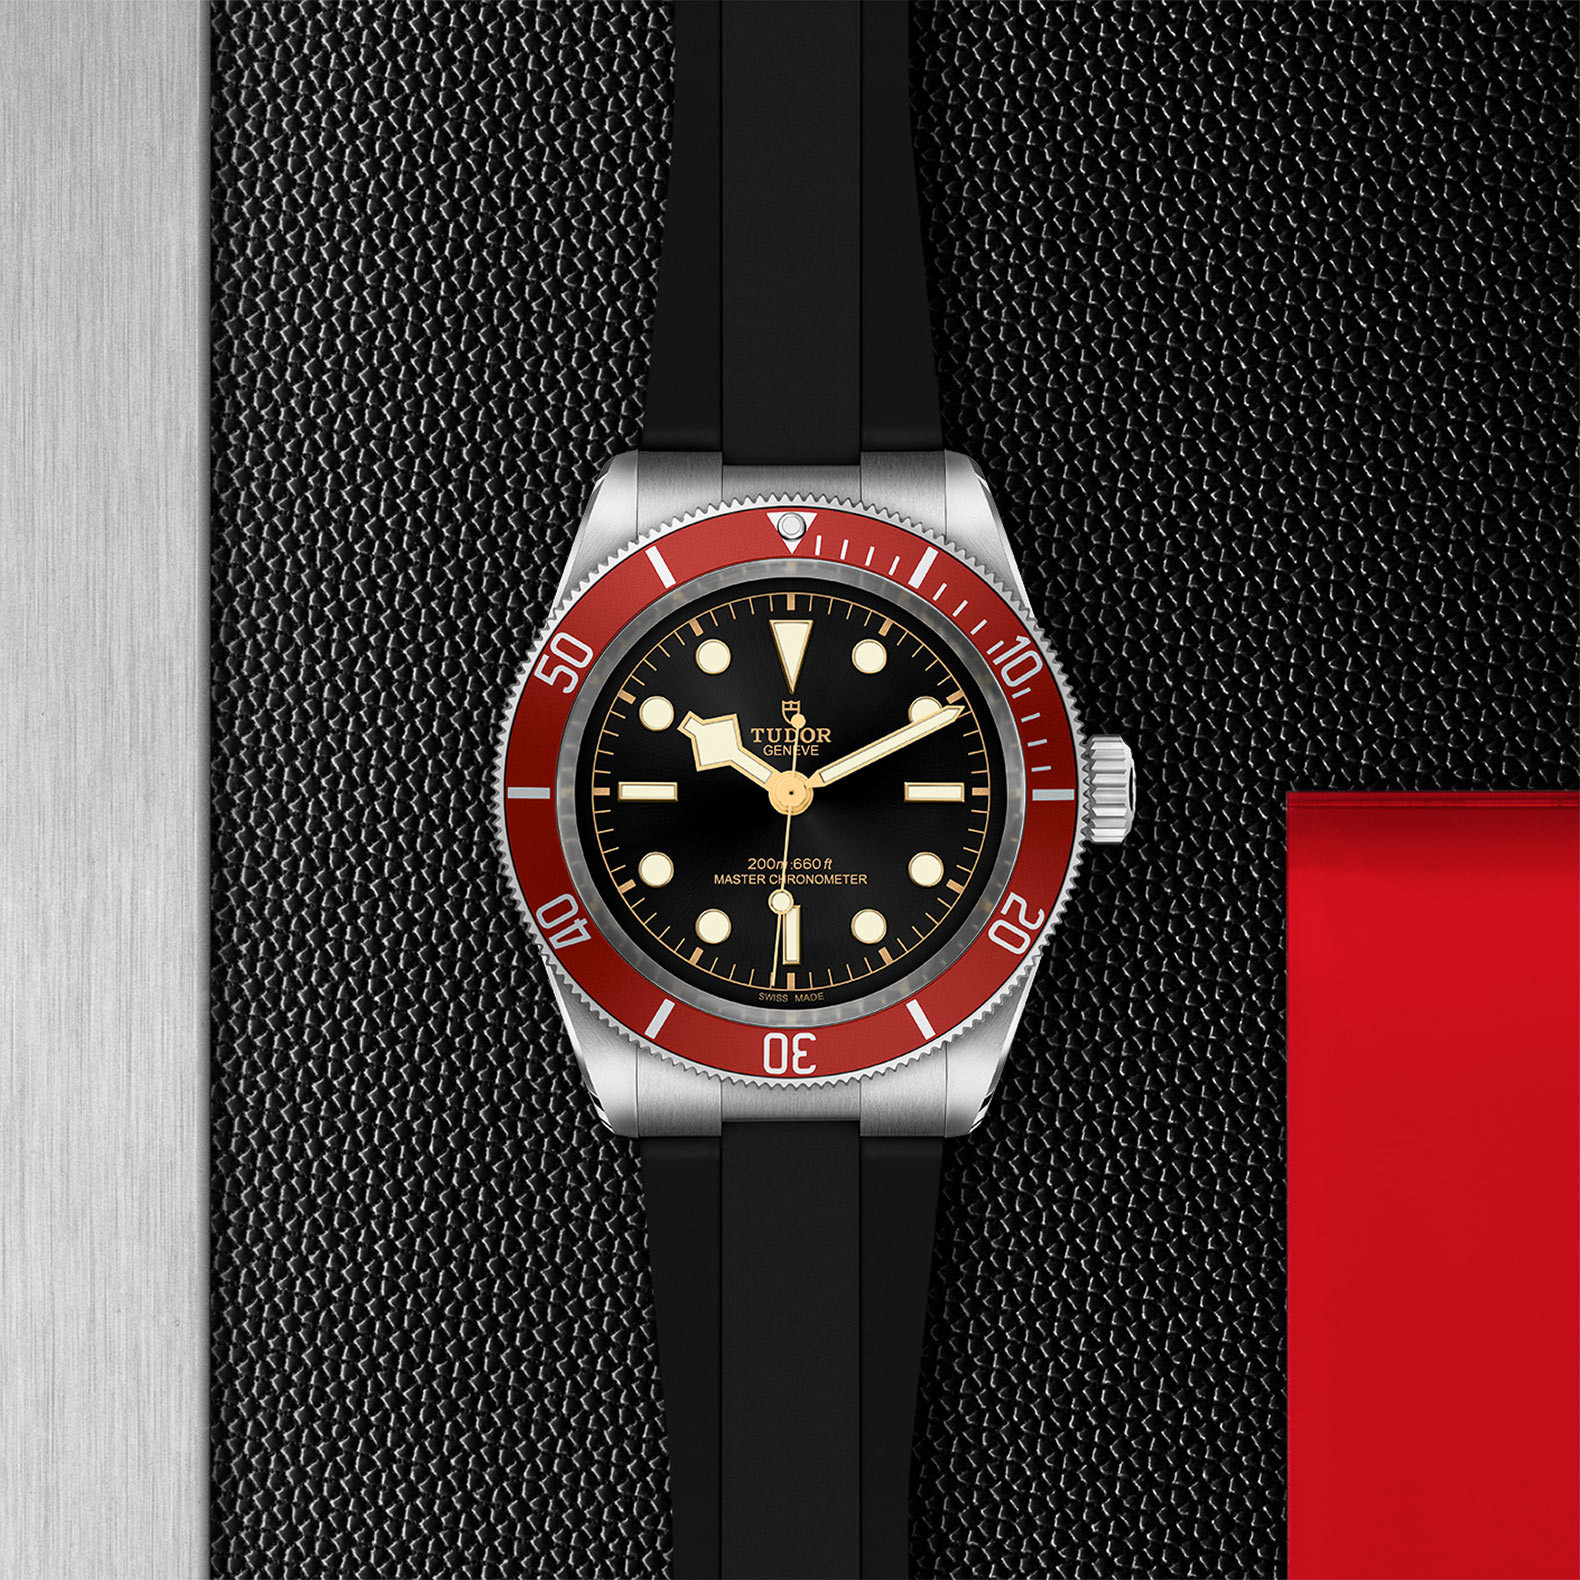 TUDOR Black Bay with 41mm Steel Case and Black Rubber Strap M7941A1A0RU-0002 Watch in Store Flat Lay